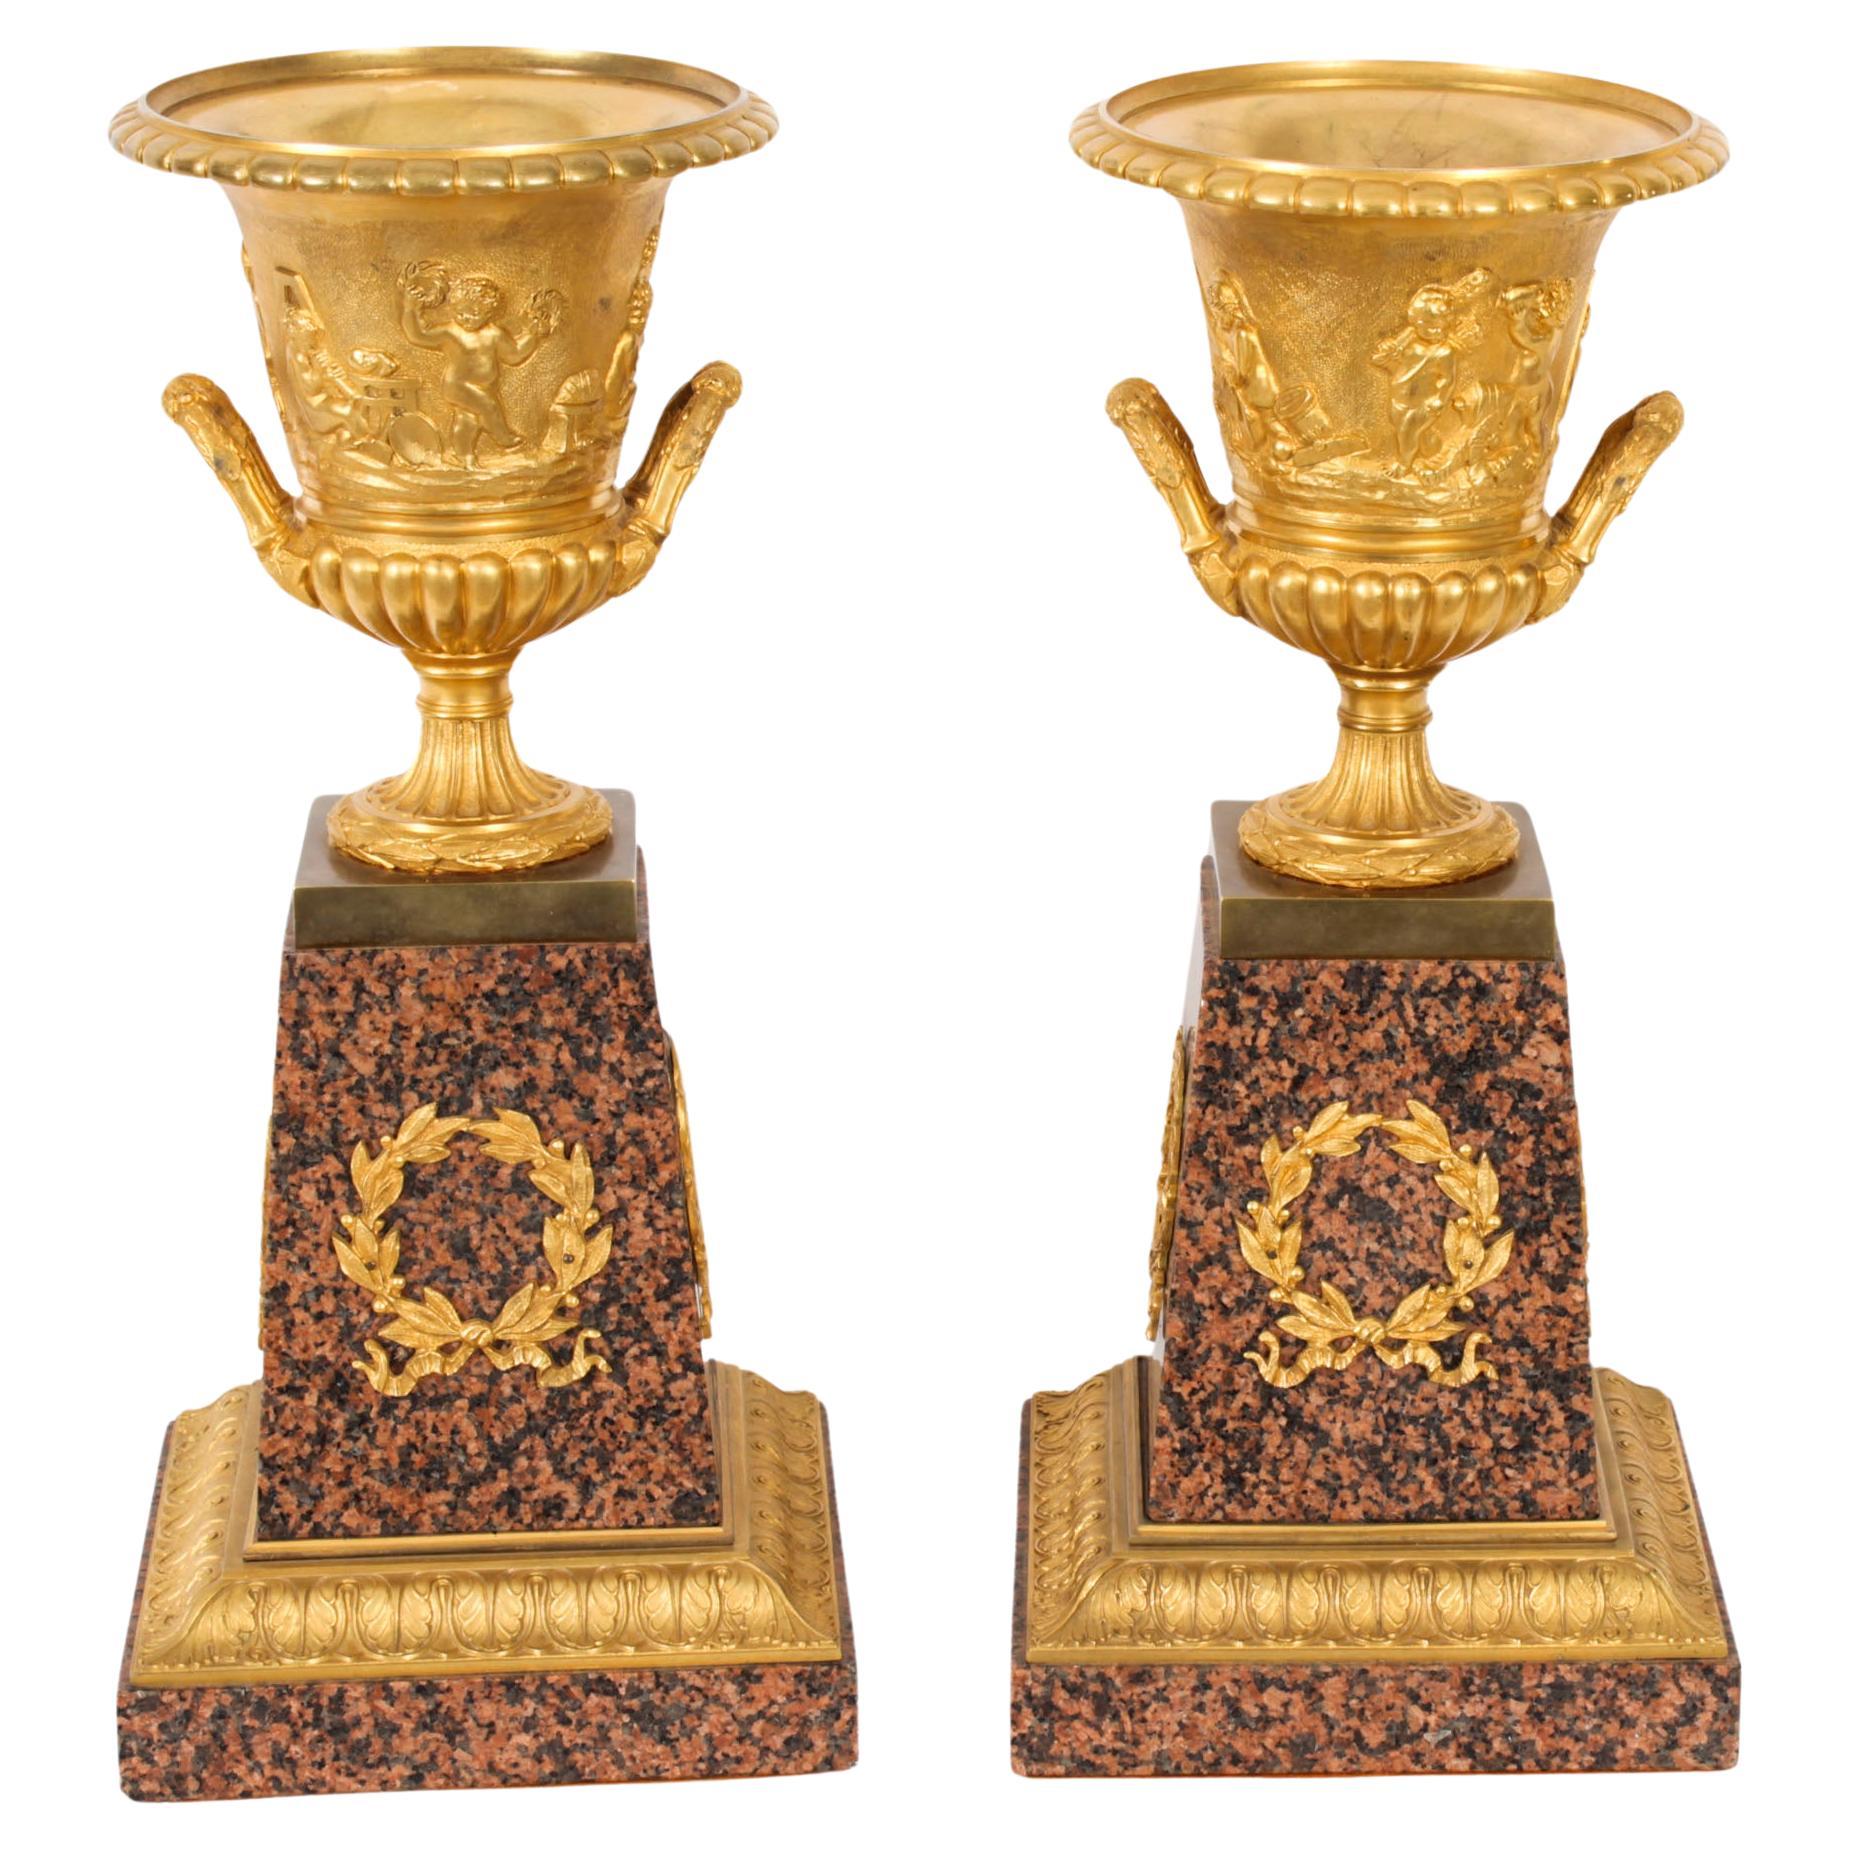 Antique Pair Large 16inch Grand Tour Gilt Bronze Campana Urns Early 20th Century